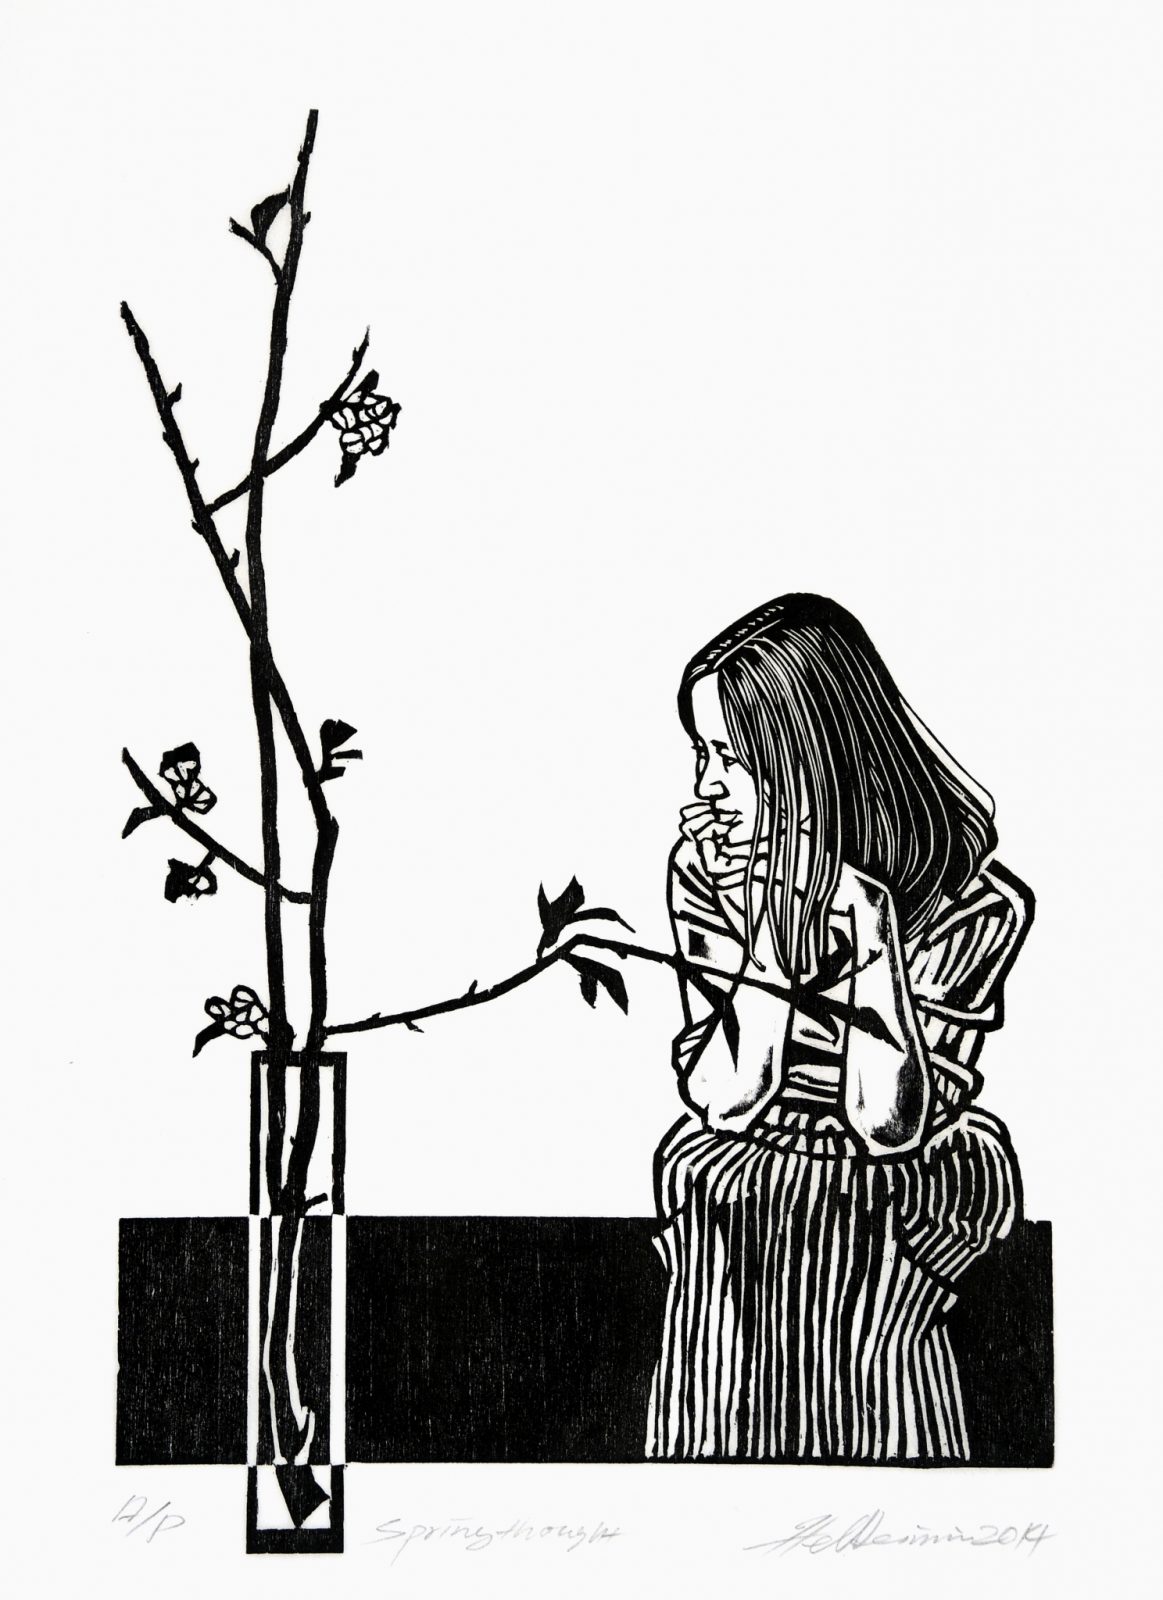 2014 Spring thought 30x19.6 cm woodcut edition 60